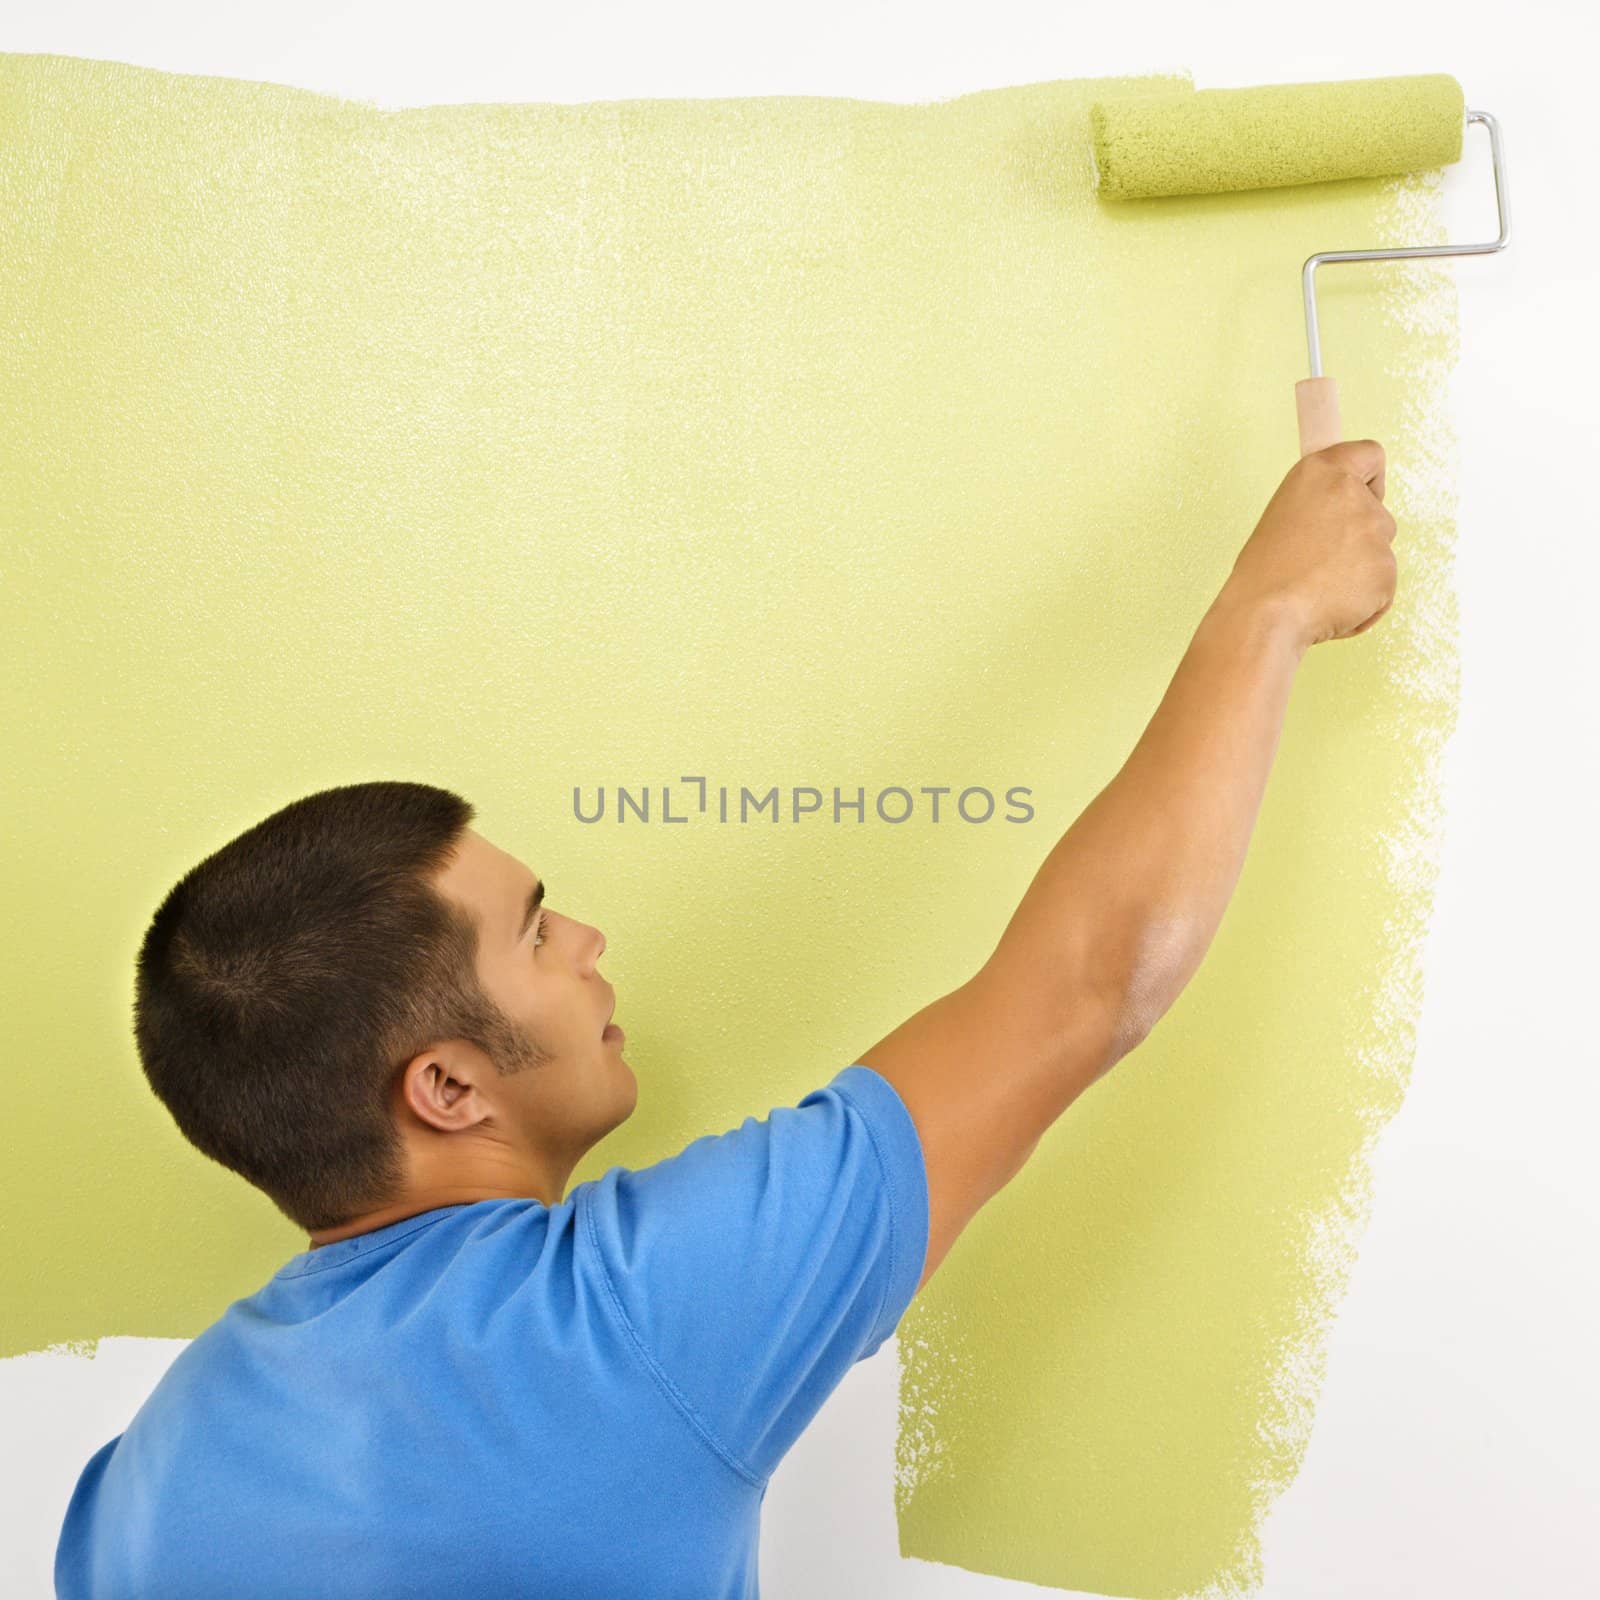 Man painting over white wall with green paint using paint roller.